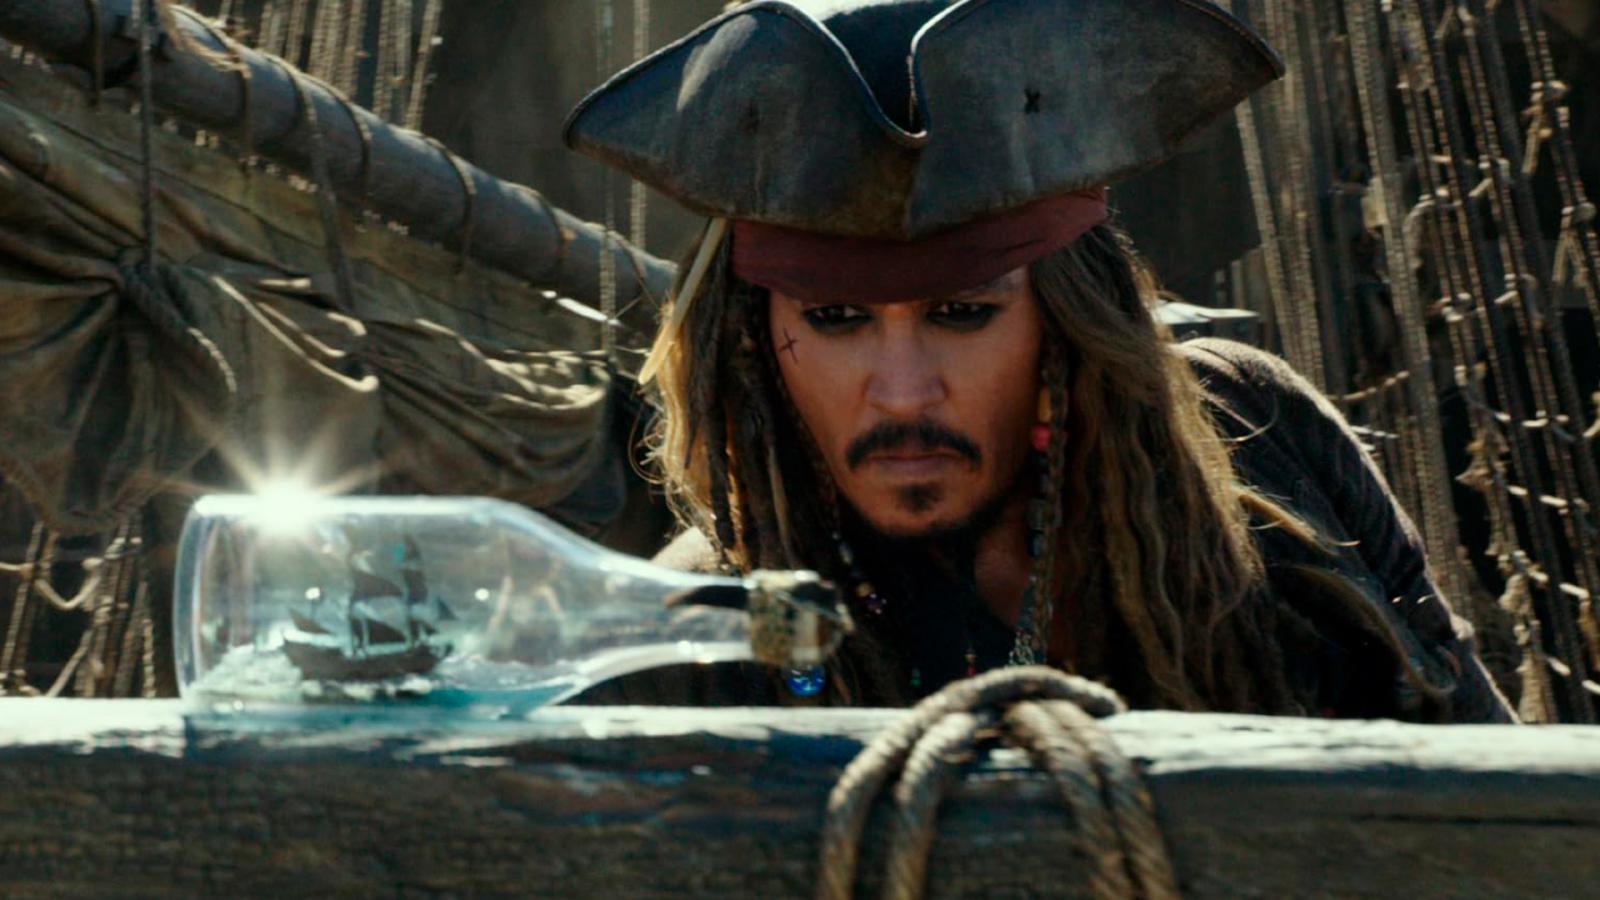 Pirates of the Caribbean: How Much Did Johnny Depp Make From Every Movie? - image 5